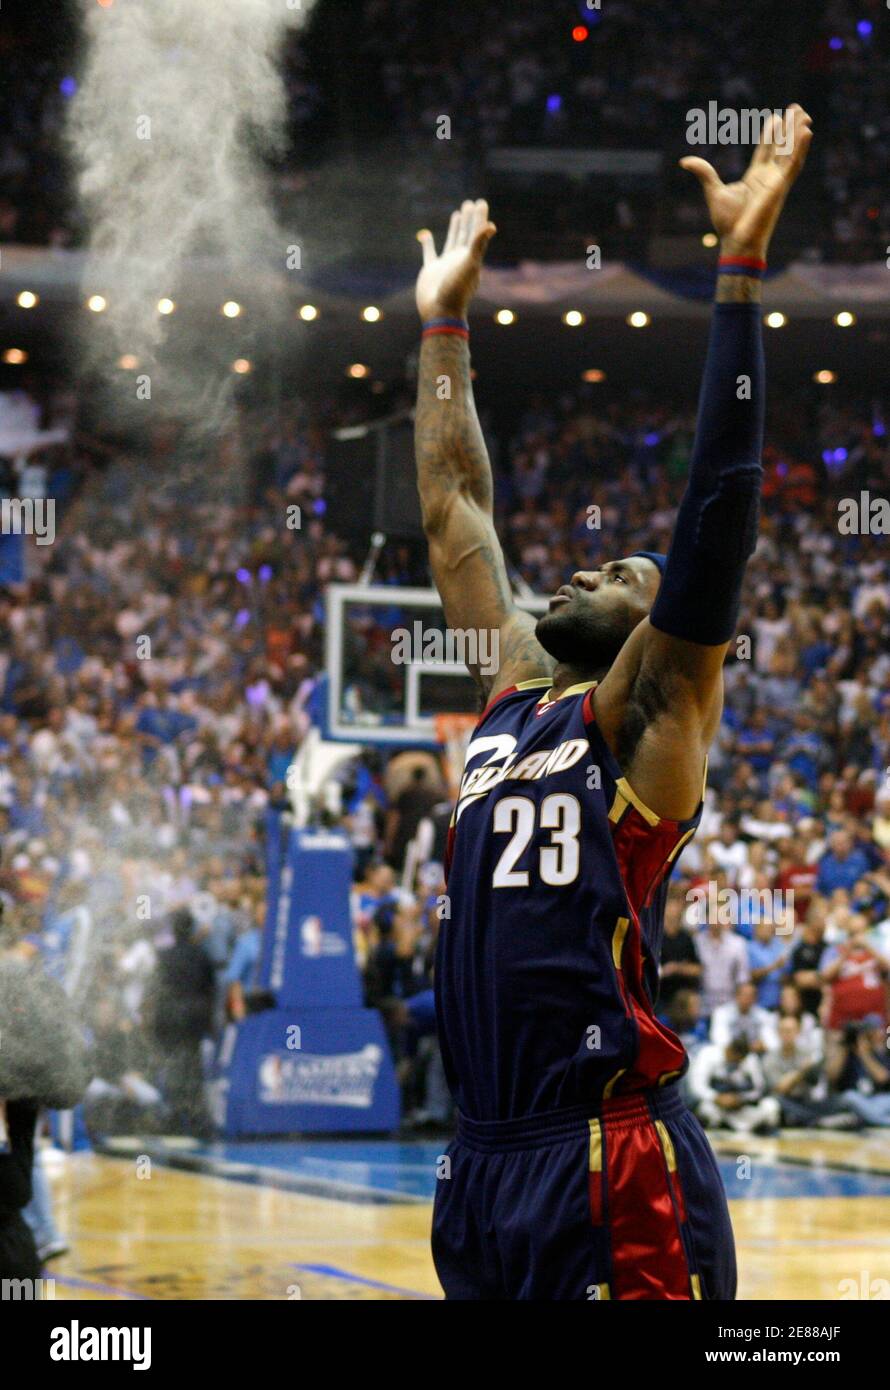 Cavaliers' LeBron James tosses powder into the air before the start of play against the Orlando Magic prior to Game 4 of their Eastern Conference Finals NBA basketball playoff series in Orlando, Florida May 26, 2009.     REUTERS/Rick Fowler (UNITED STATES SPORT BASKETBALL) Stock Photo